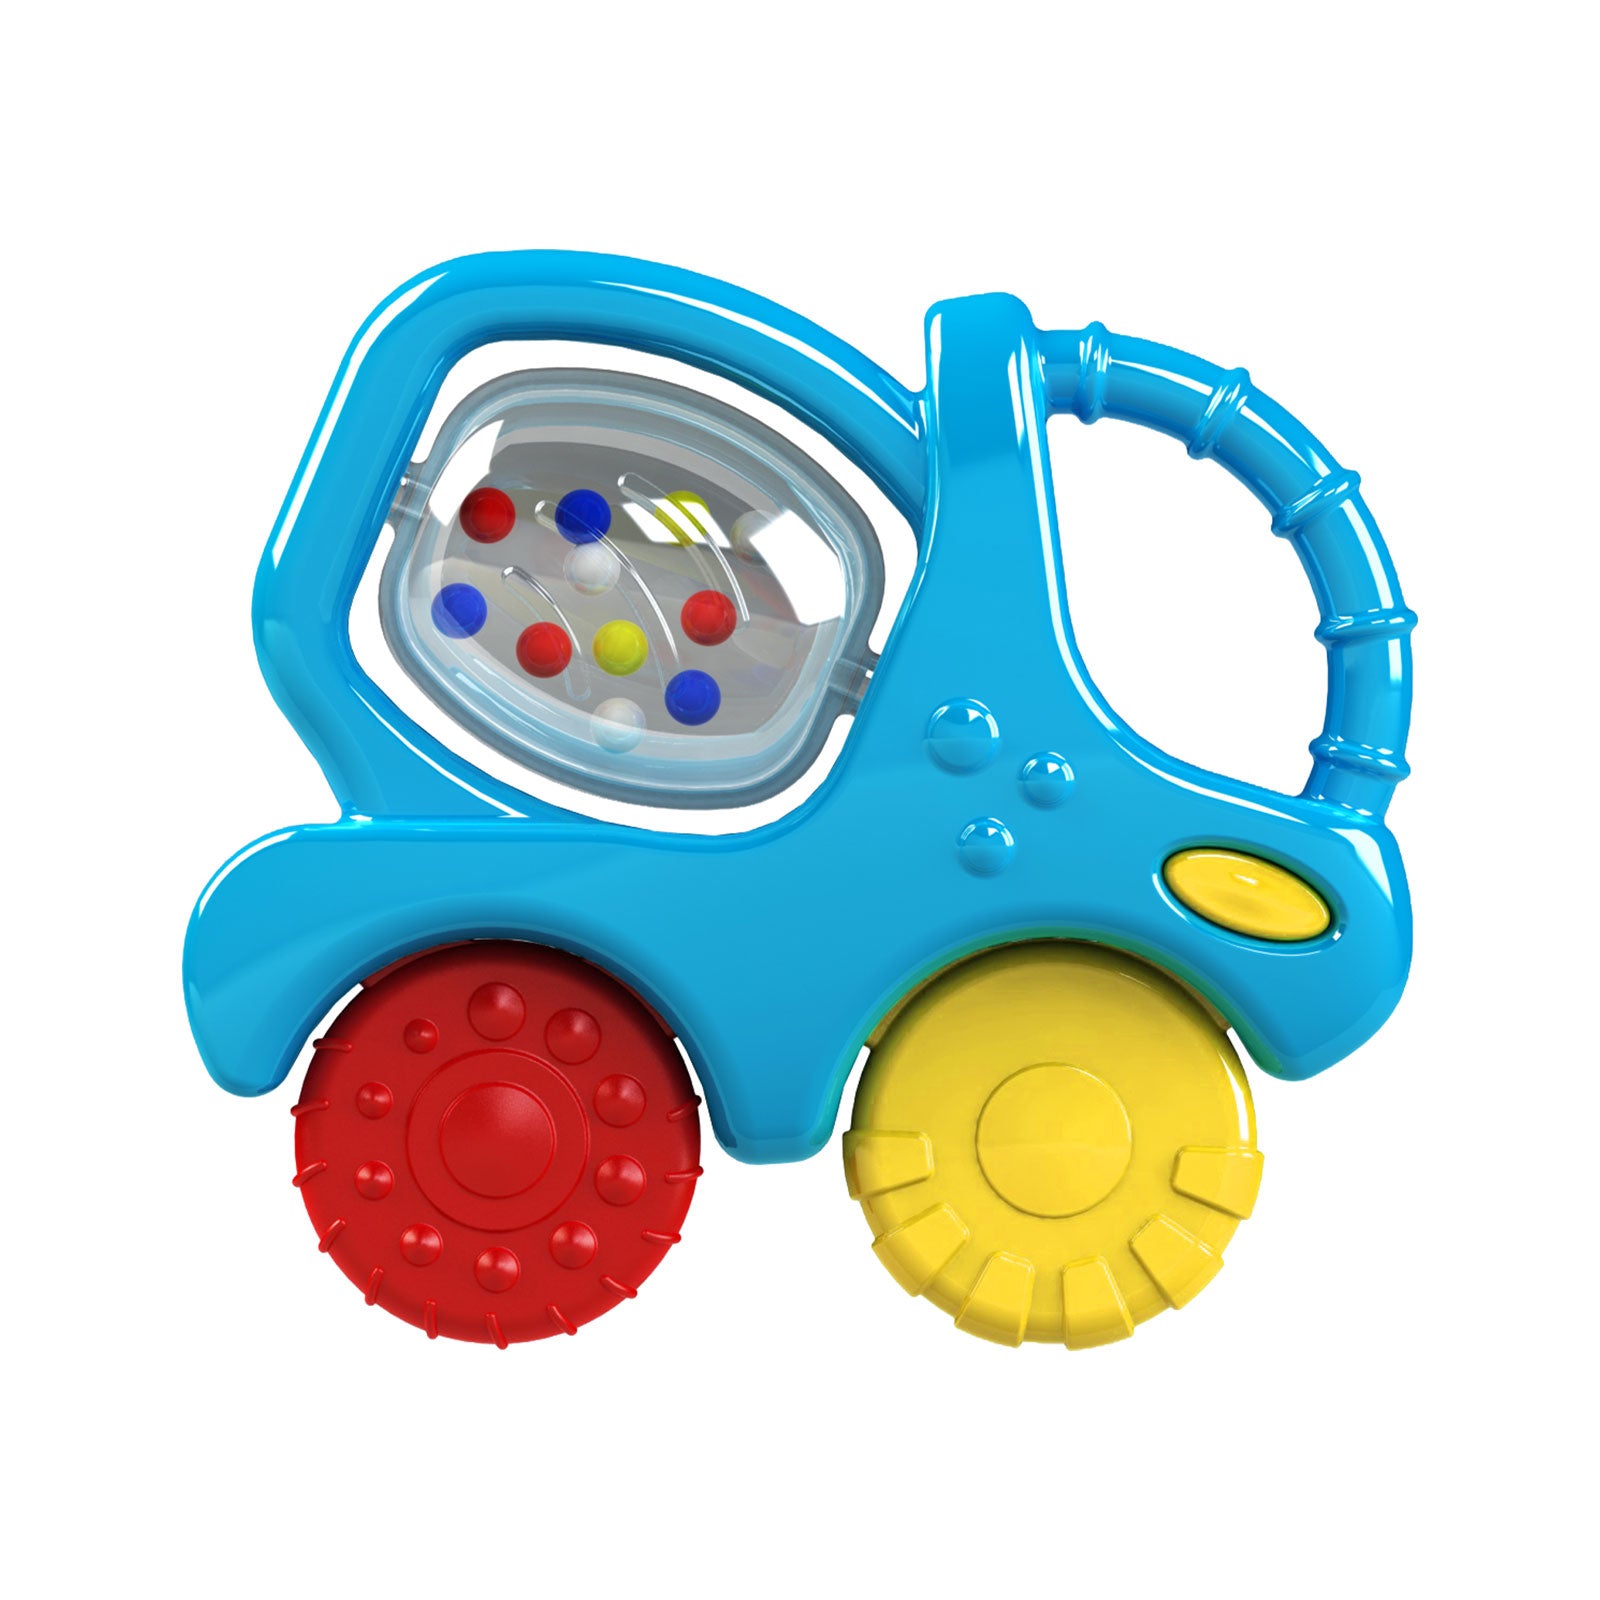 mixer truck for playing kids